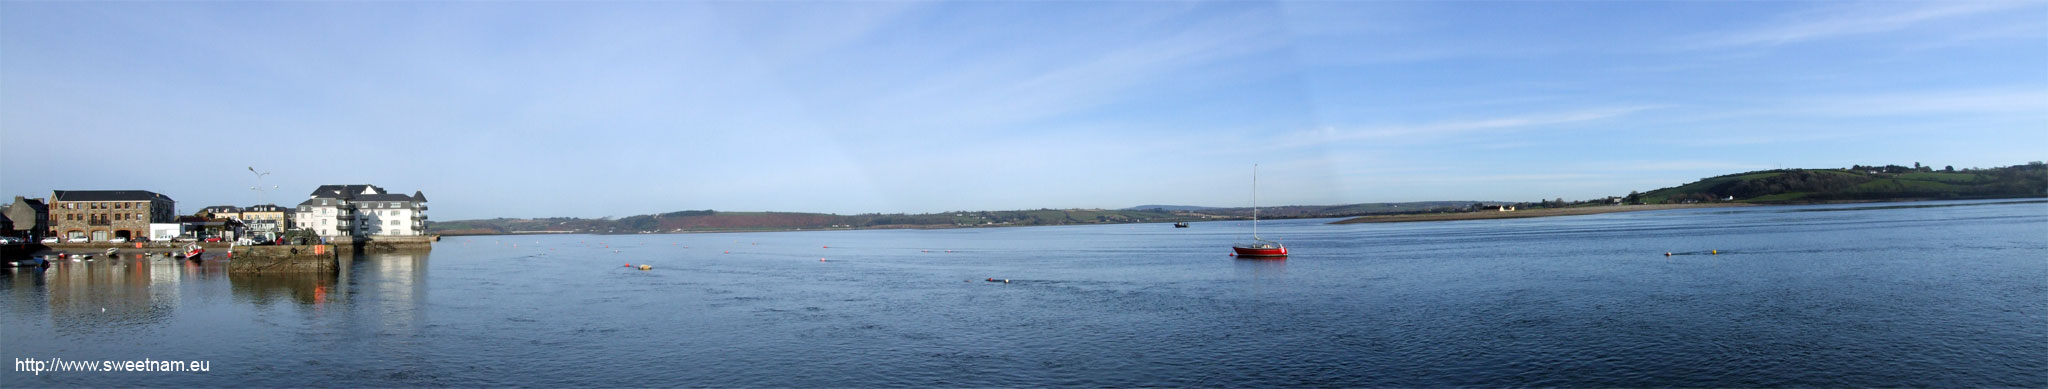 Panoramic photo of Youghal looking up the River Blackwater, taken from Youghal Jetty.